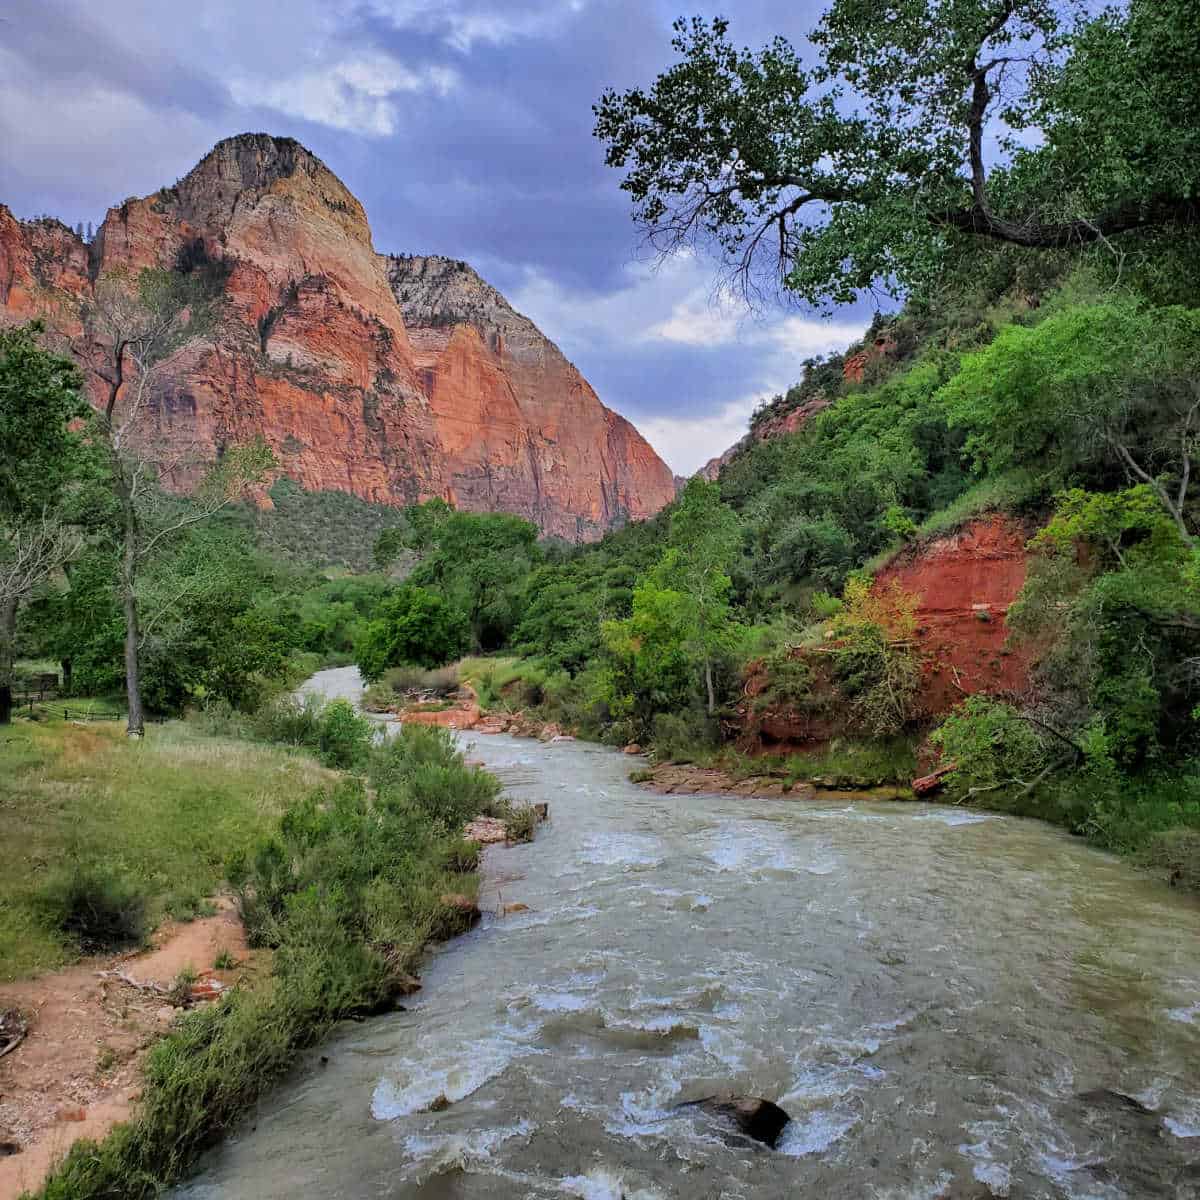 The Virgin River flowing through Zion National Park